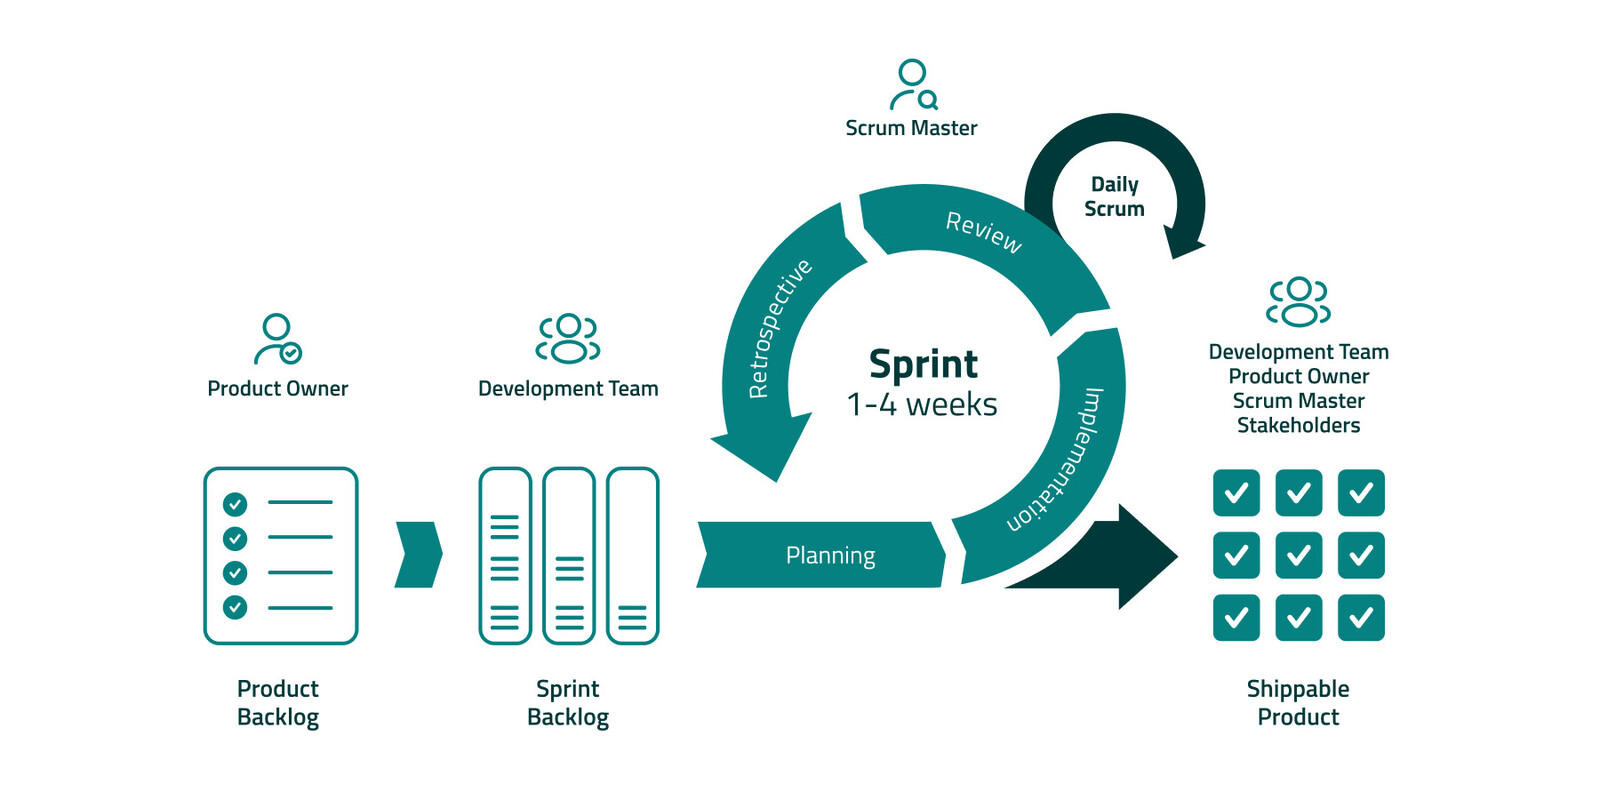 Overview of a Scrum Sprint